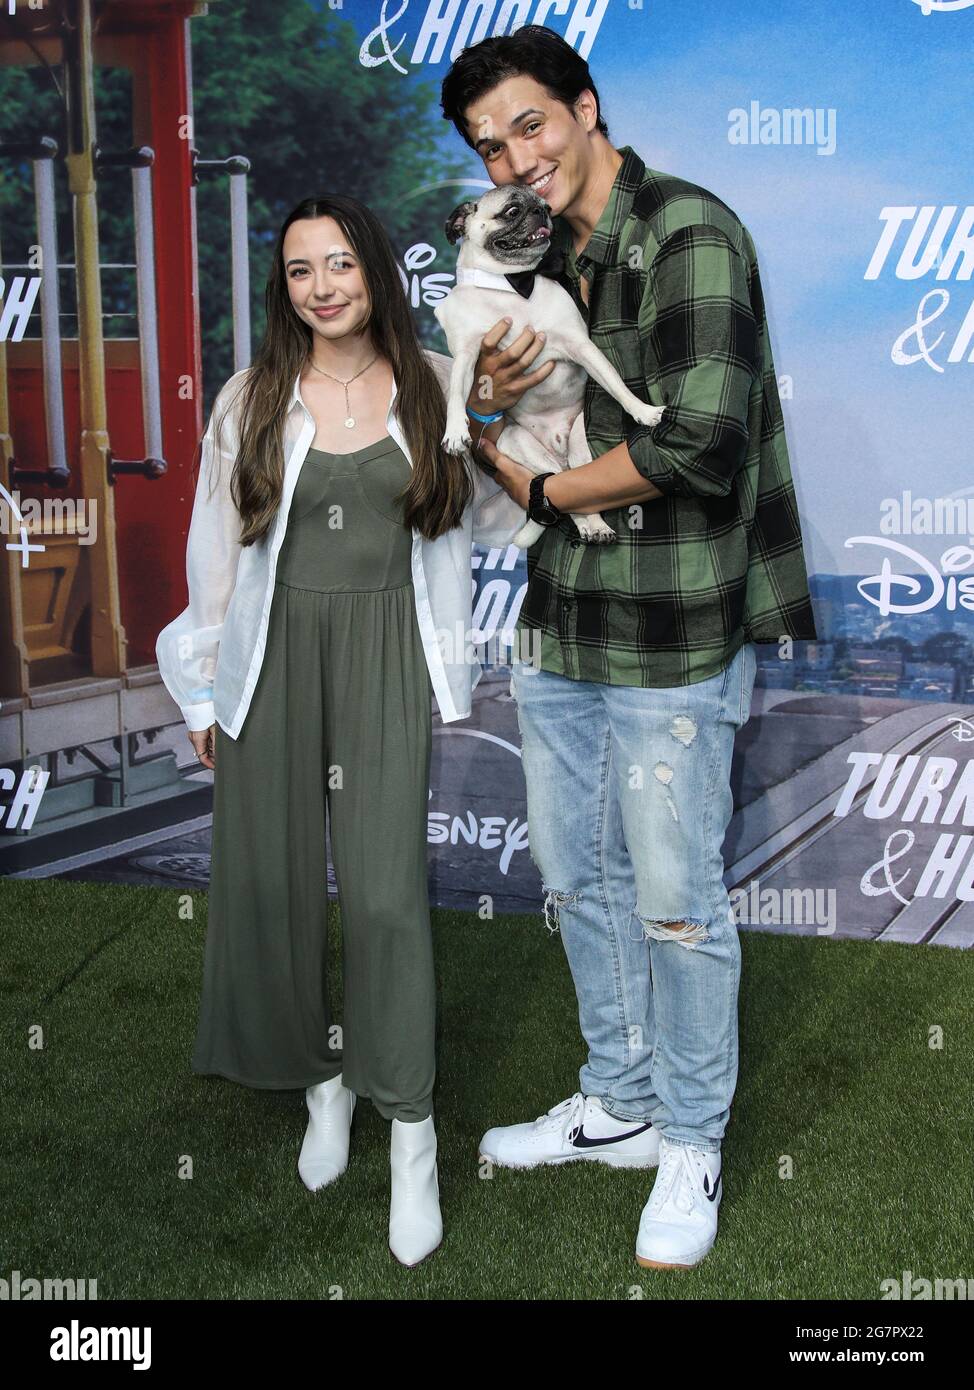 Los Angeles, United States. 15th July, 2021. CENTURY CITY, LOS ANGELES,  CALIFORNIA, USA - JULY 15: Veronica Merrell, Aaron Burriss and Guppy the  Pug arrive at the Disney 'Turner & Hooch' Los